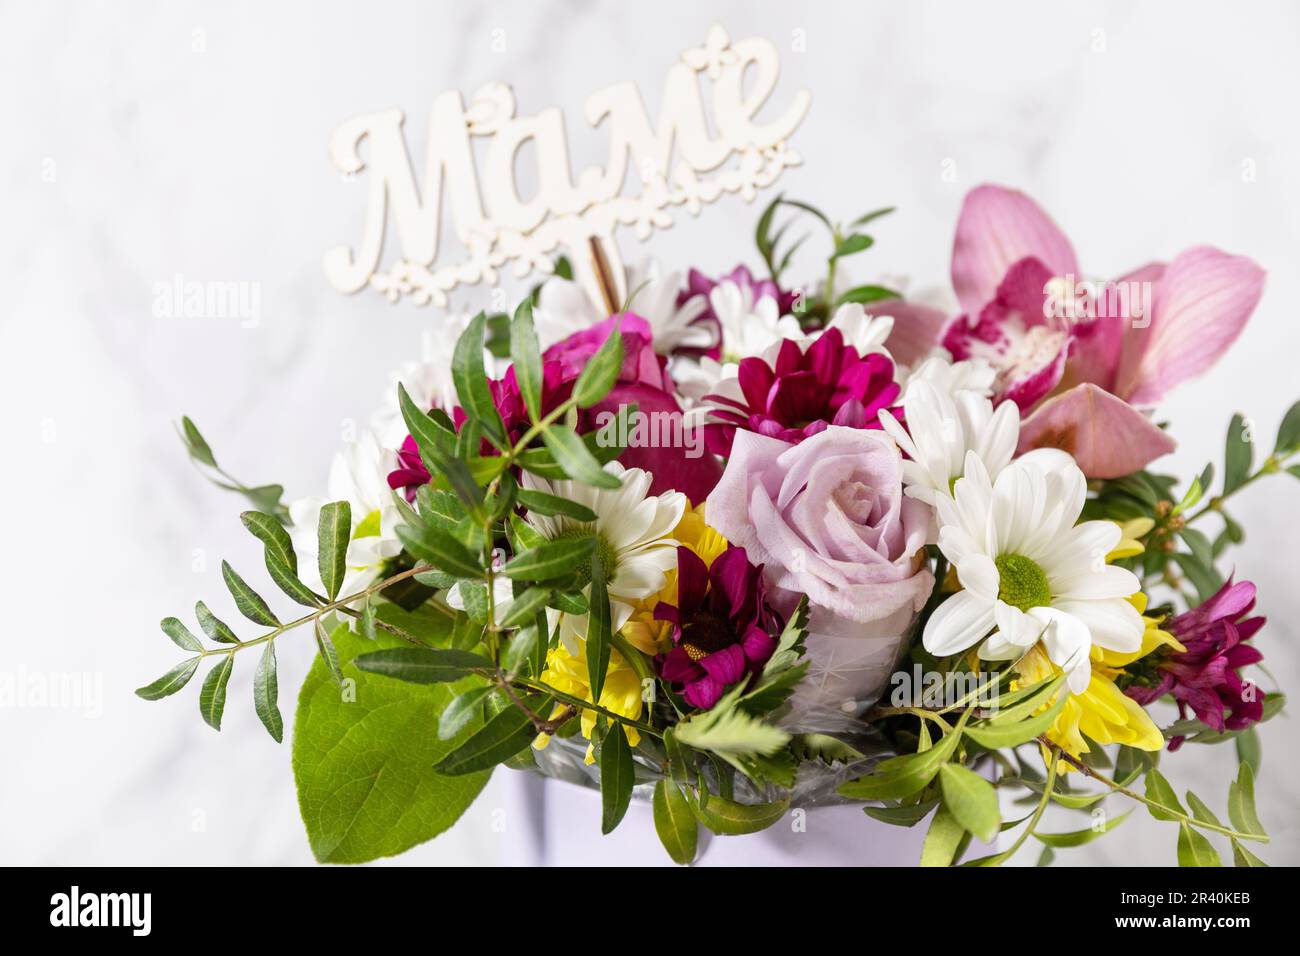 Happy Mothers Day background with dainty flowers. Beautiful greeting card. Holiday concept. Stock Photo